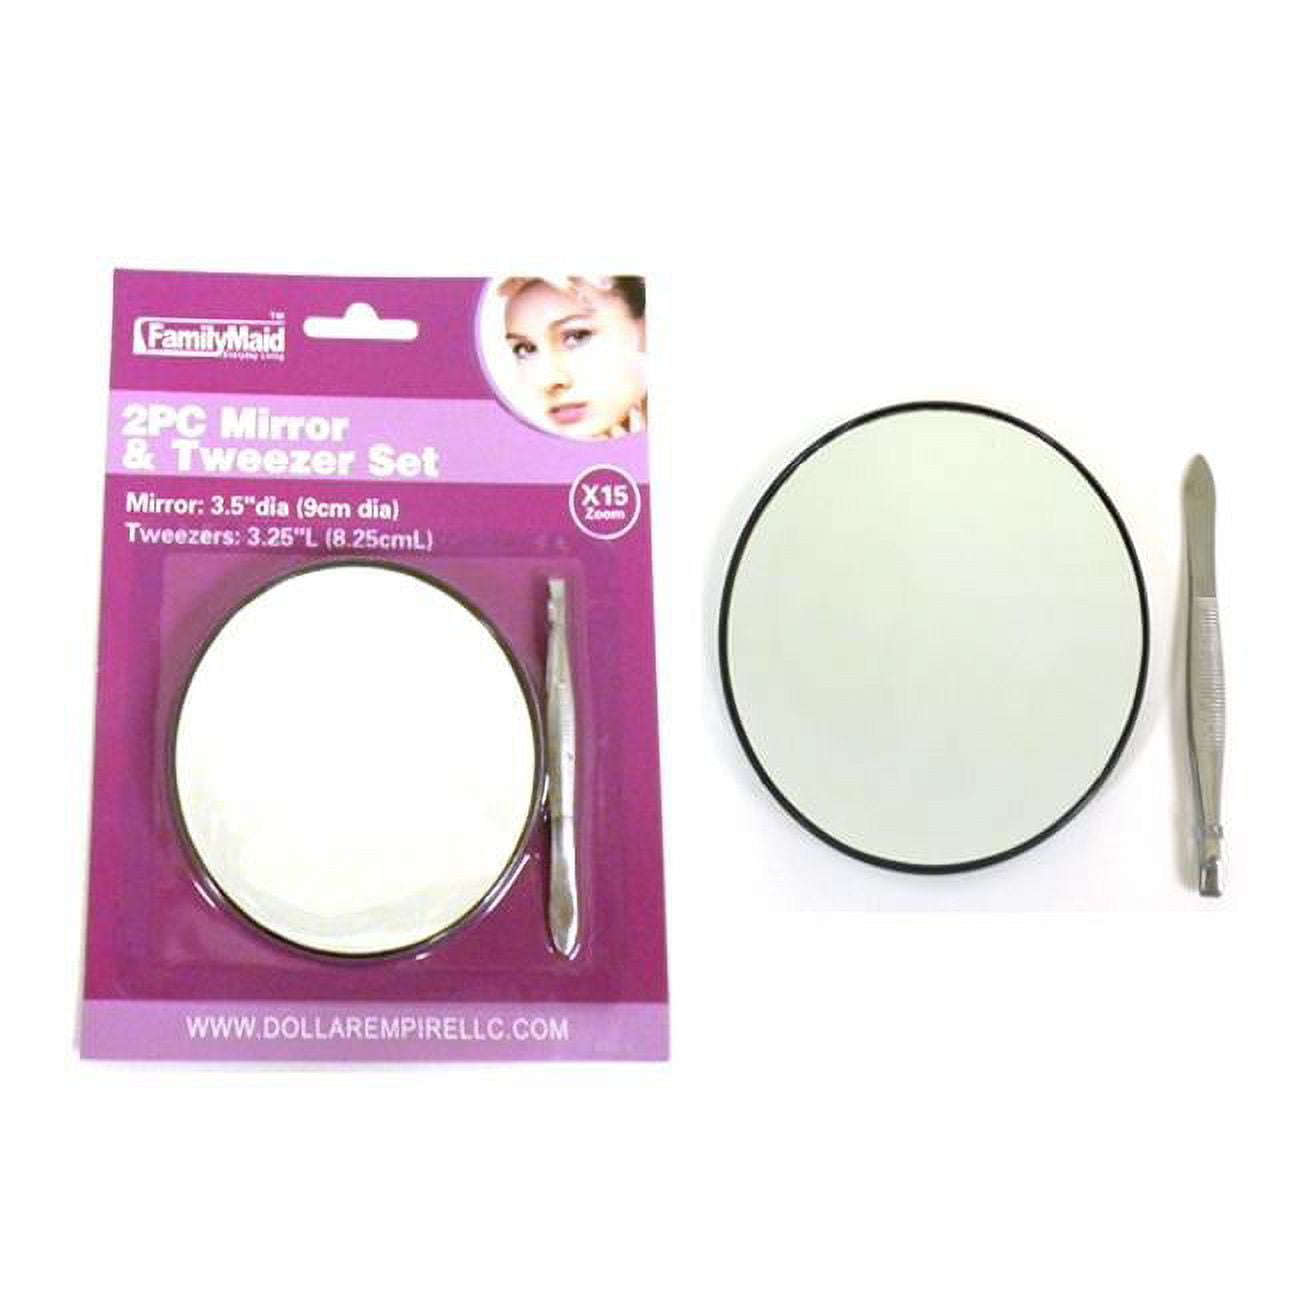 Picture of FamilyMaid 23321 3.5 in. Dia. Tweezers with 3.25 in. Mirror - 2 Piece